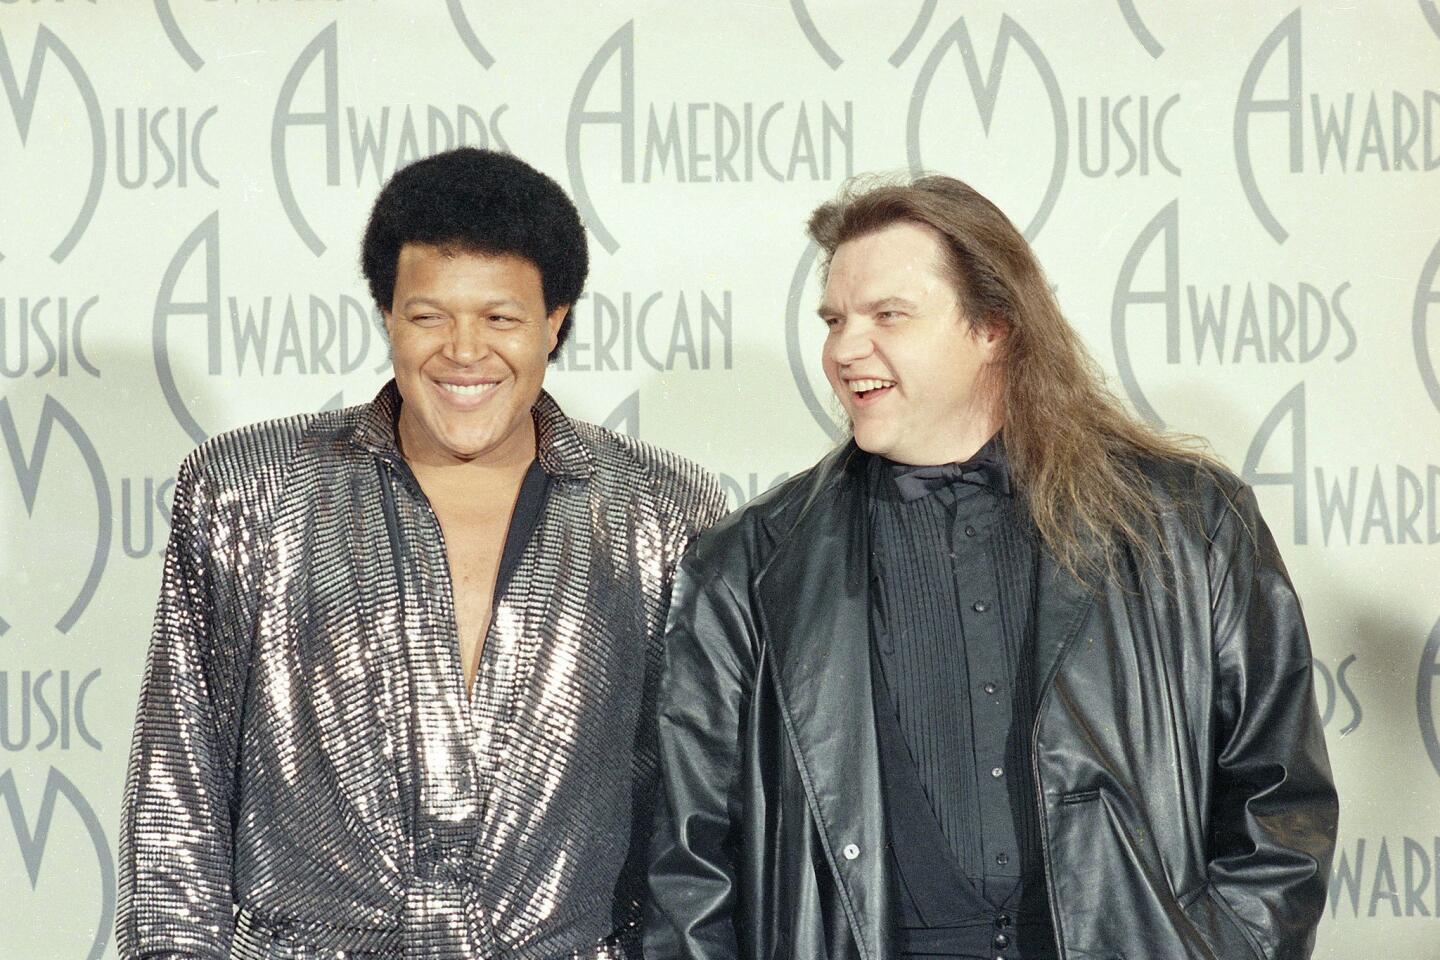 Meat Loaf and Chubby Checker